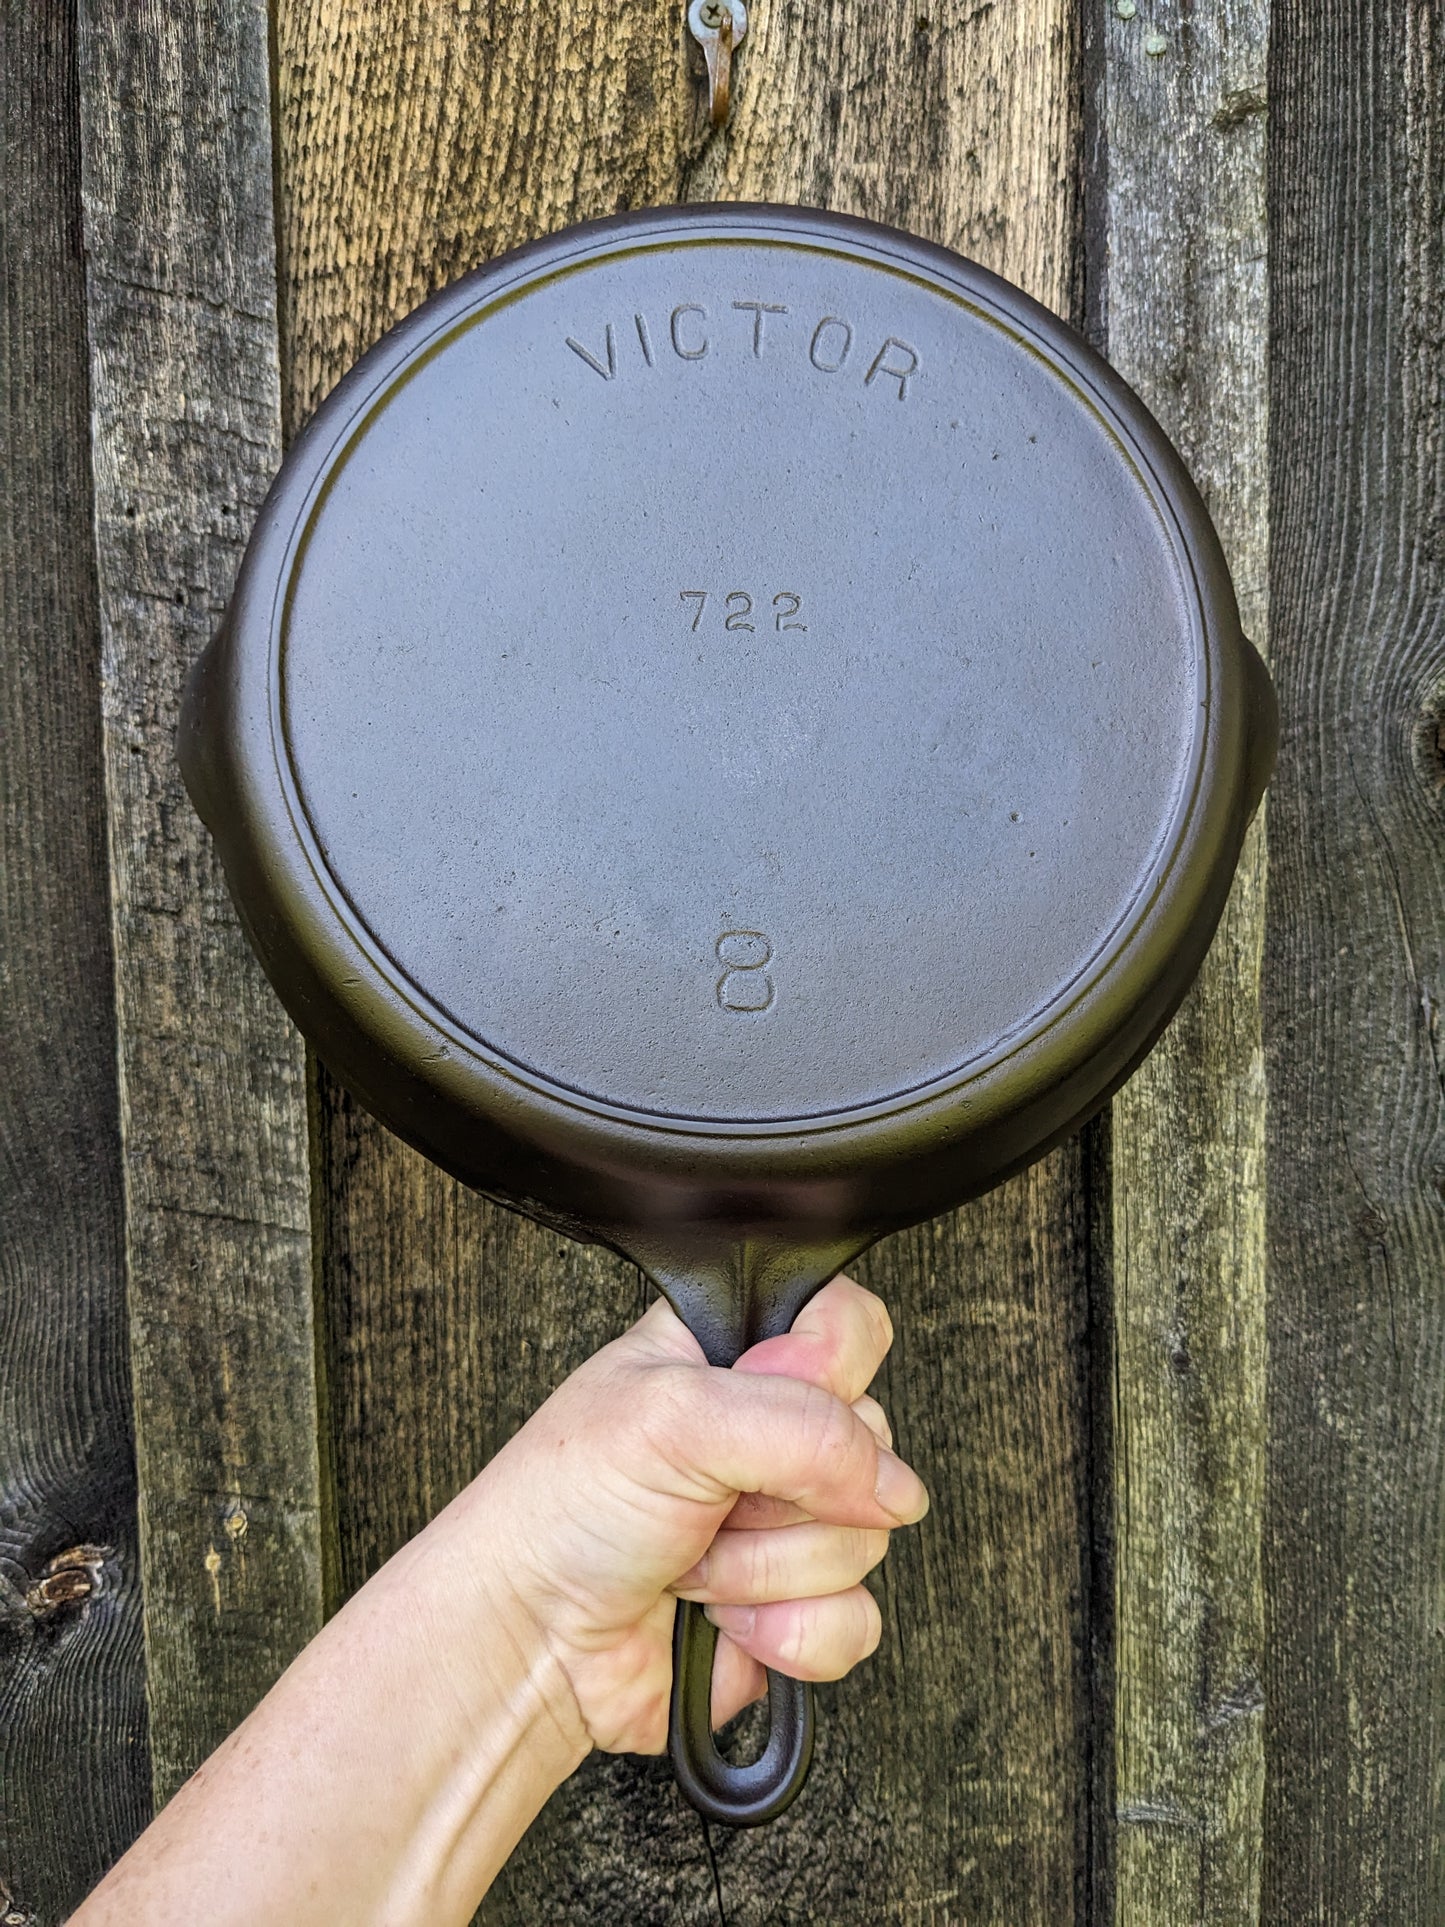 Victor by Griswold #8 Cast Iron Skillet 722